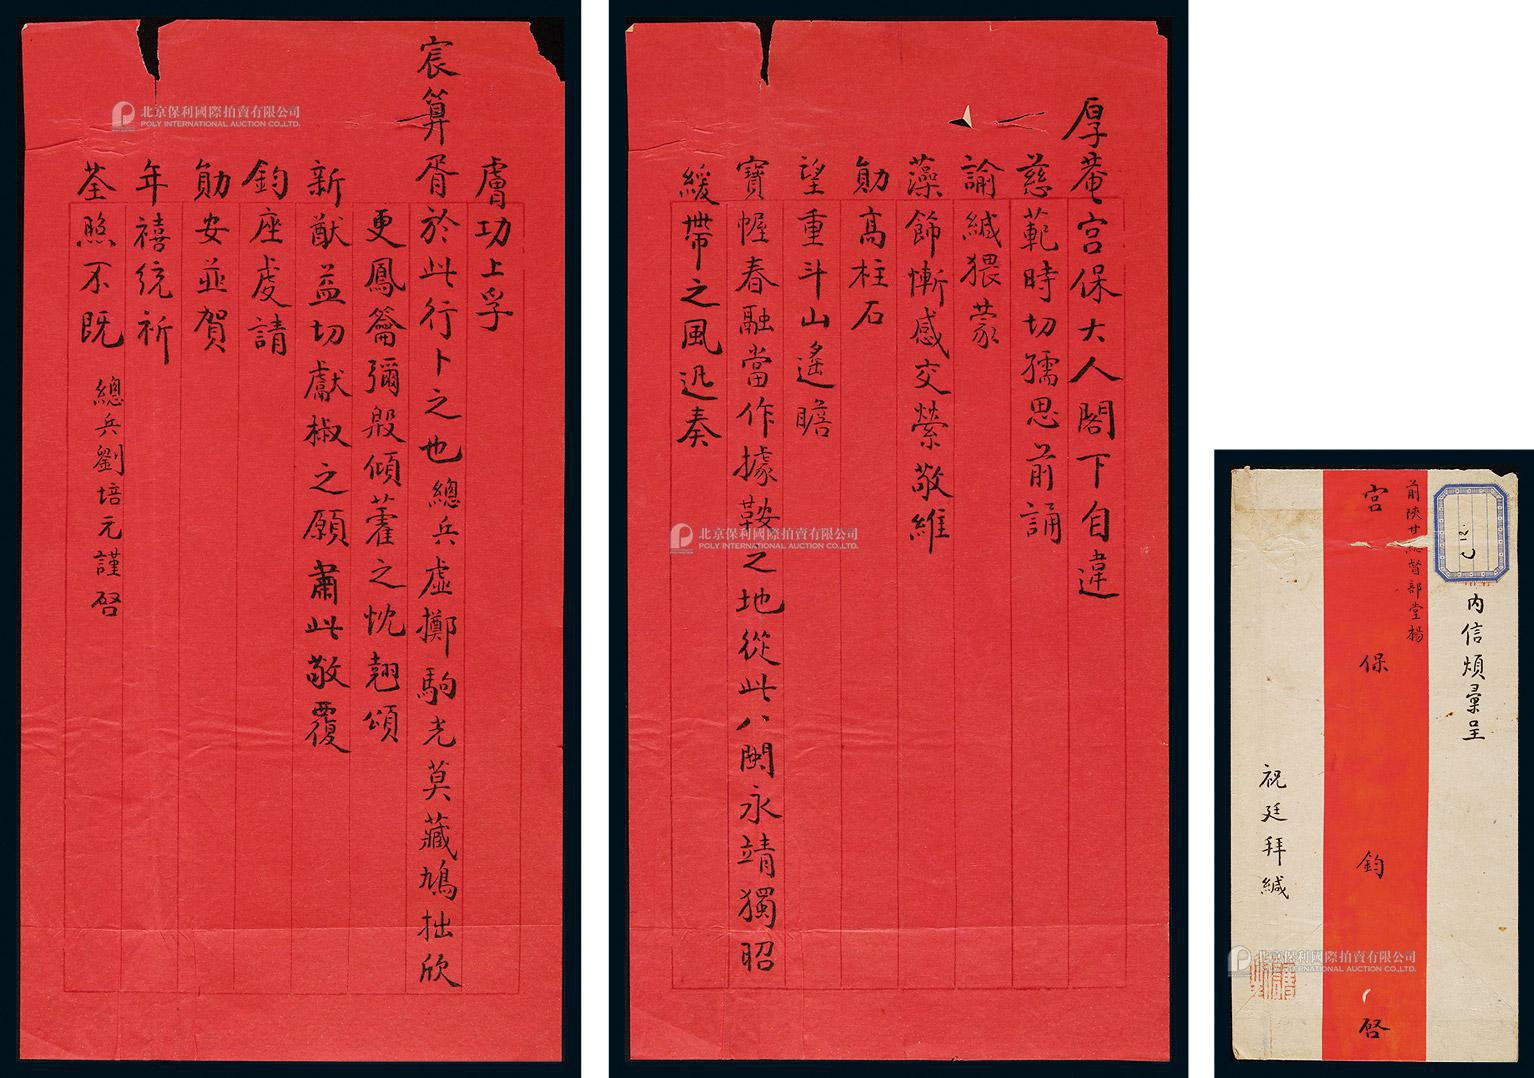 One letter of one page by Liu Peiyuan Zhu Ting to Yang Yuebin, with original cover